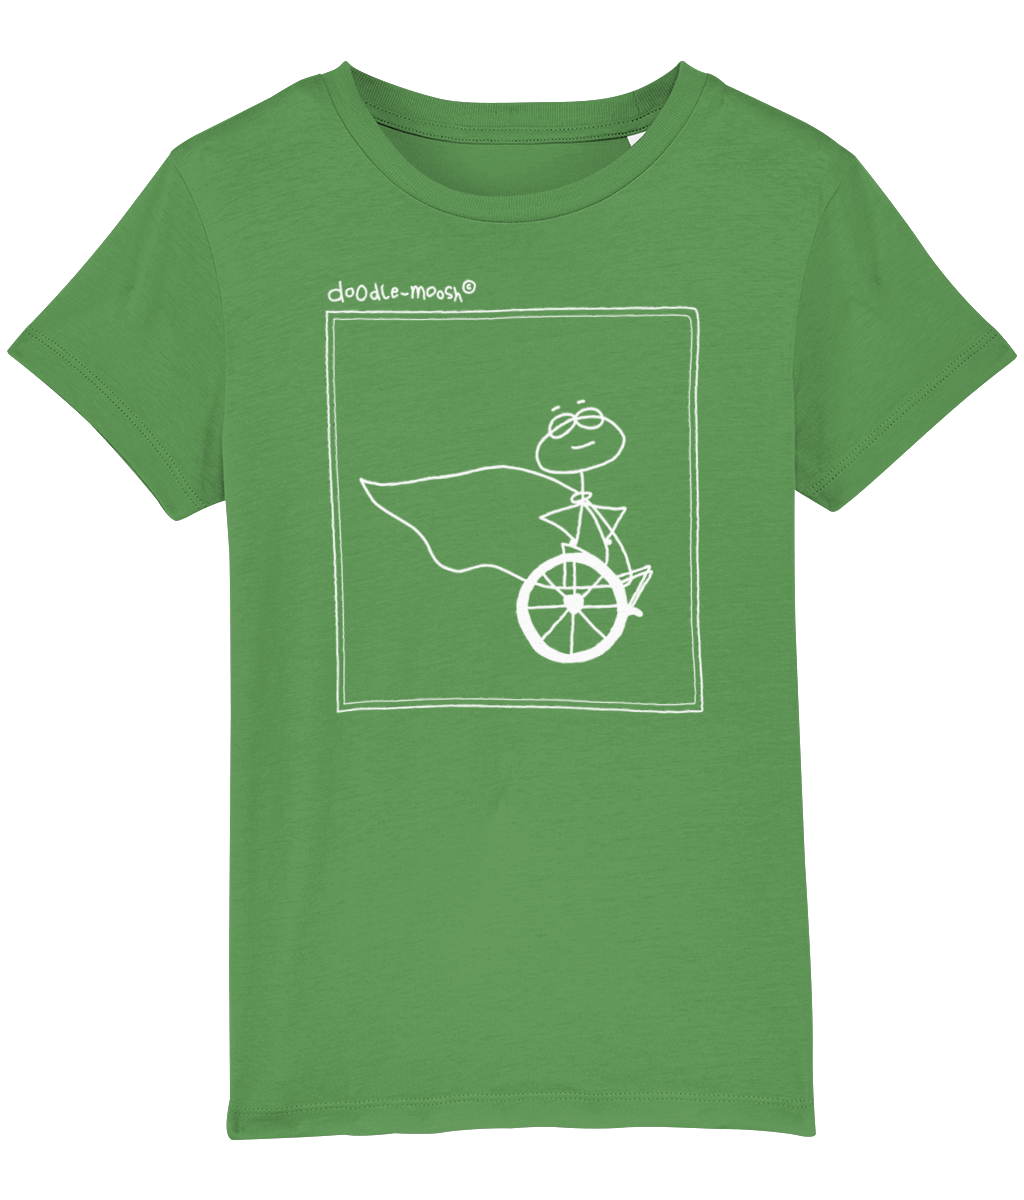 superpower t-shirt, green with white